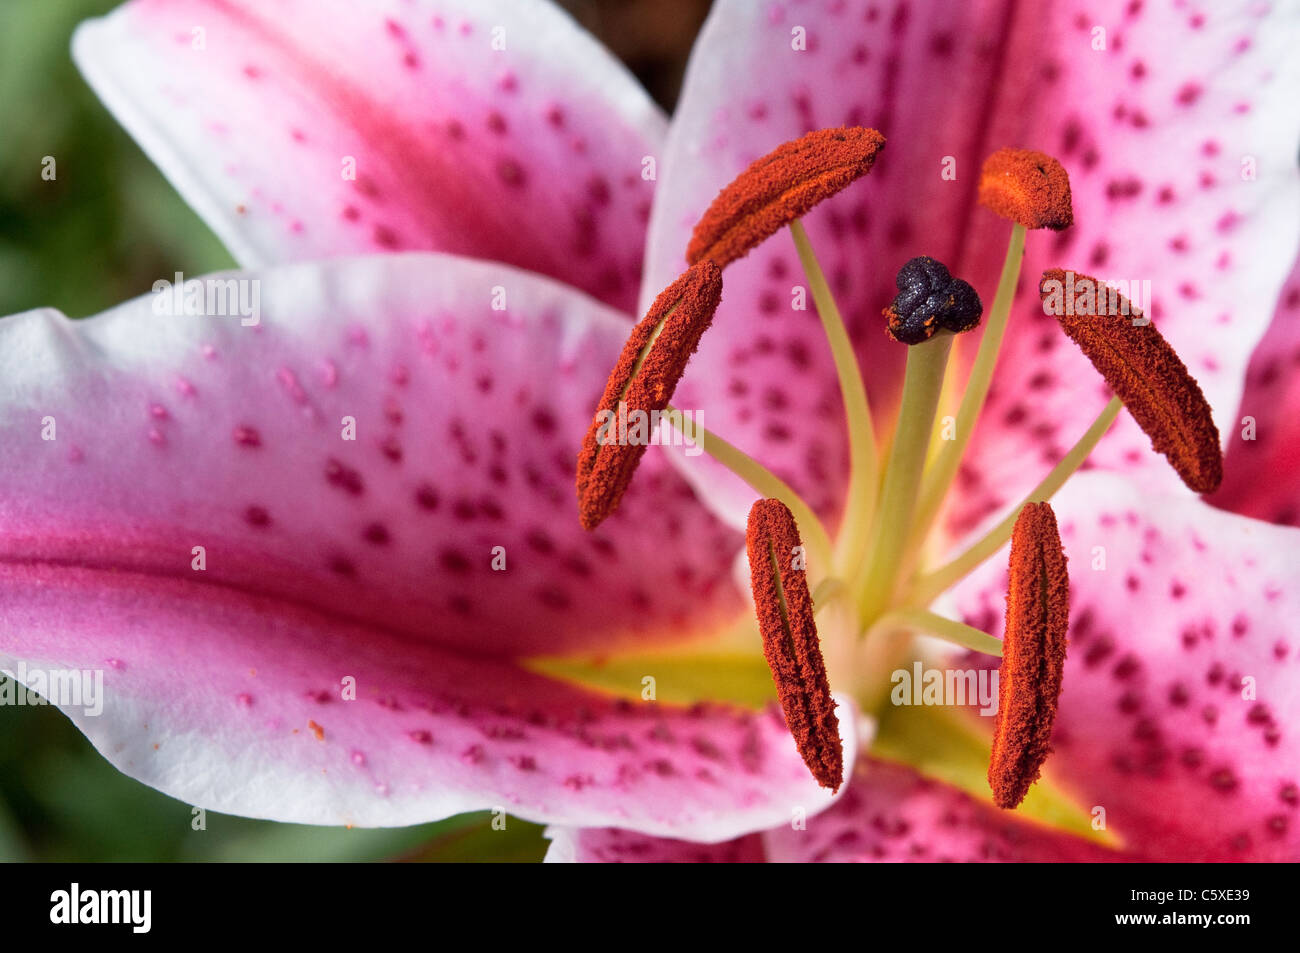 Stargazer Lily - detail of stamens loaded with pollen; also stigma on which visible specks of pollen can be seen. Pollination. Stock Photo